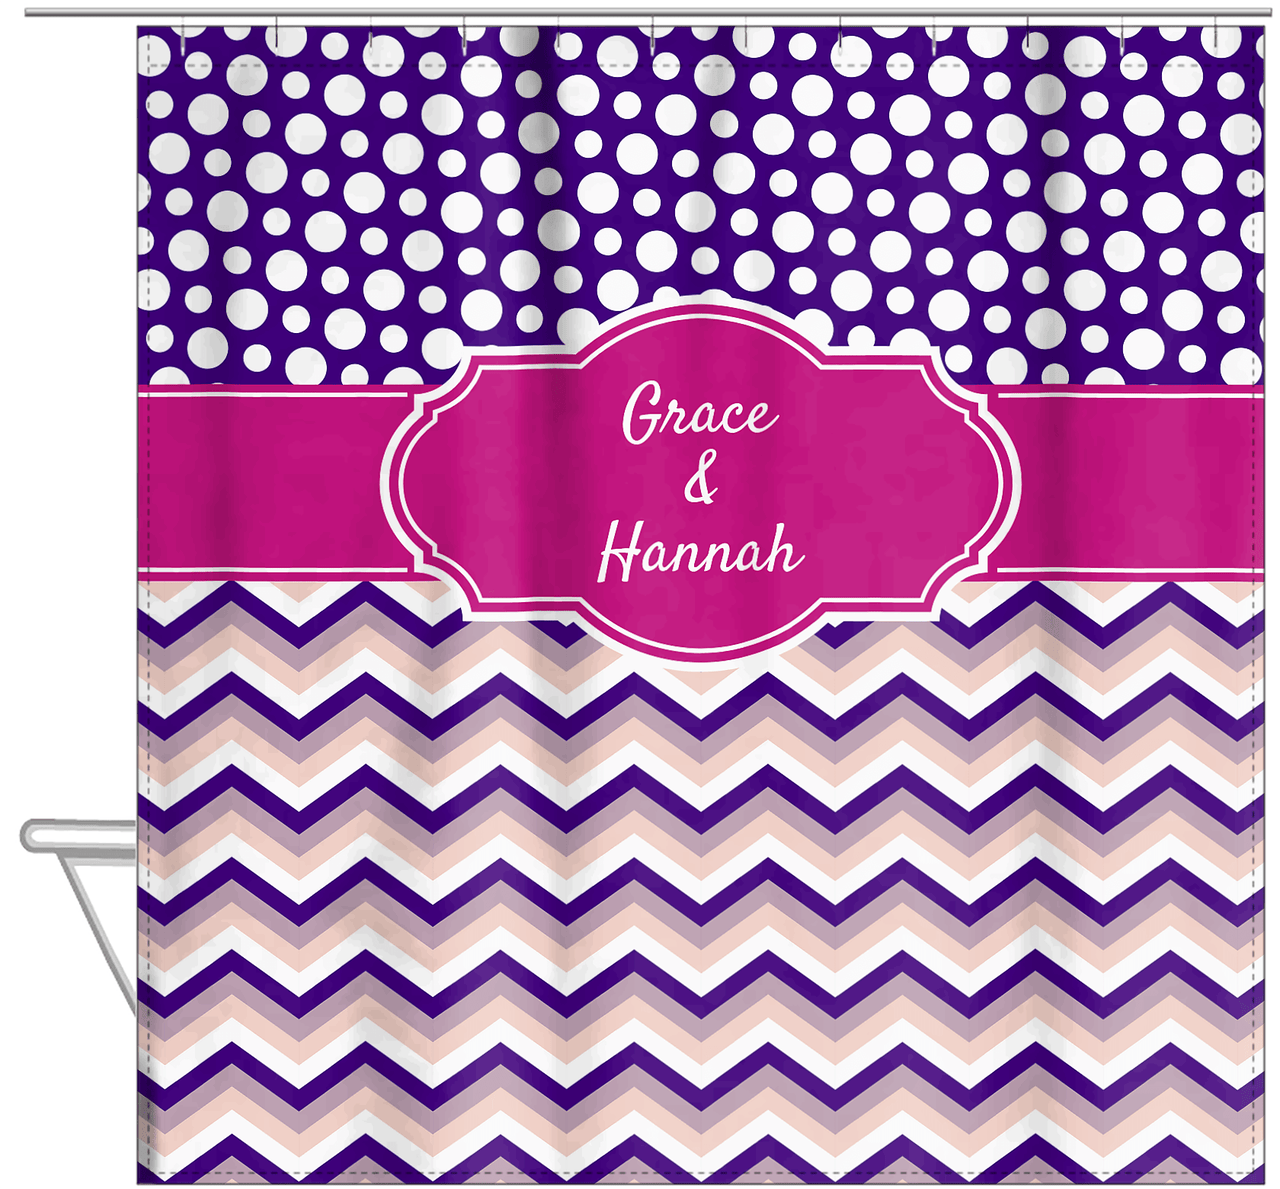 Personalized Polka Dots and Chevron IV Shower Curtain - Pink and Purple - Fancy Nameplate - Hanging View